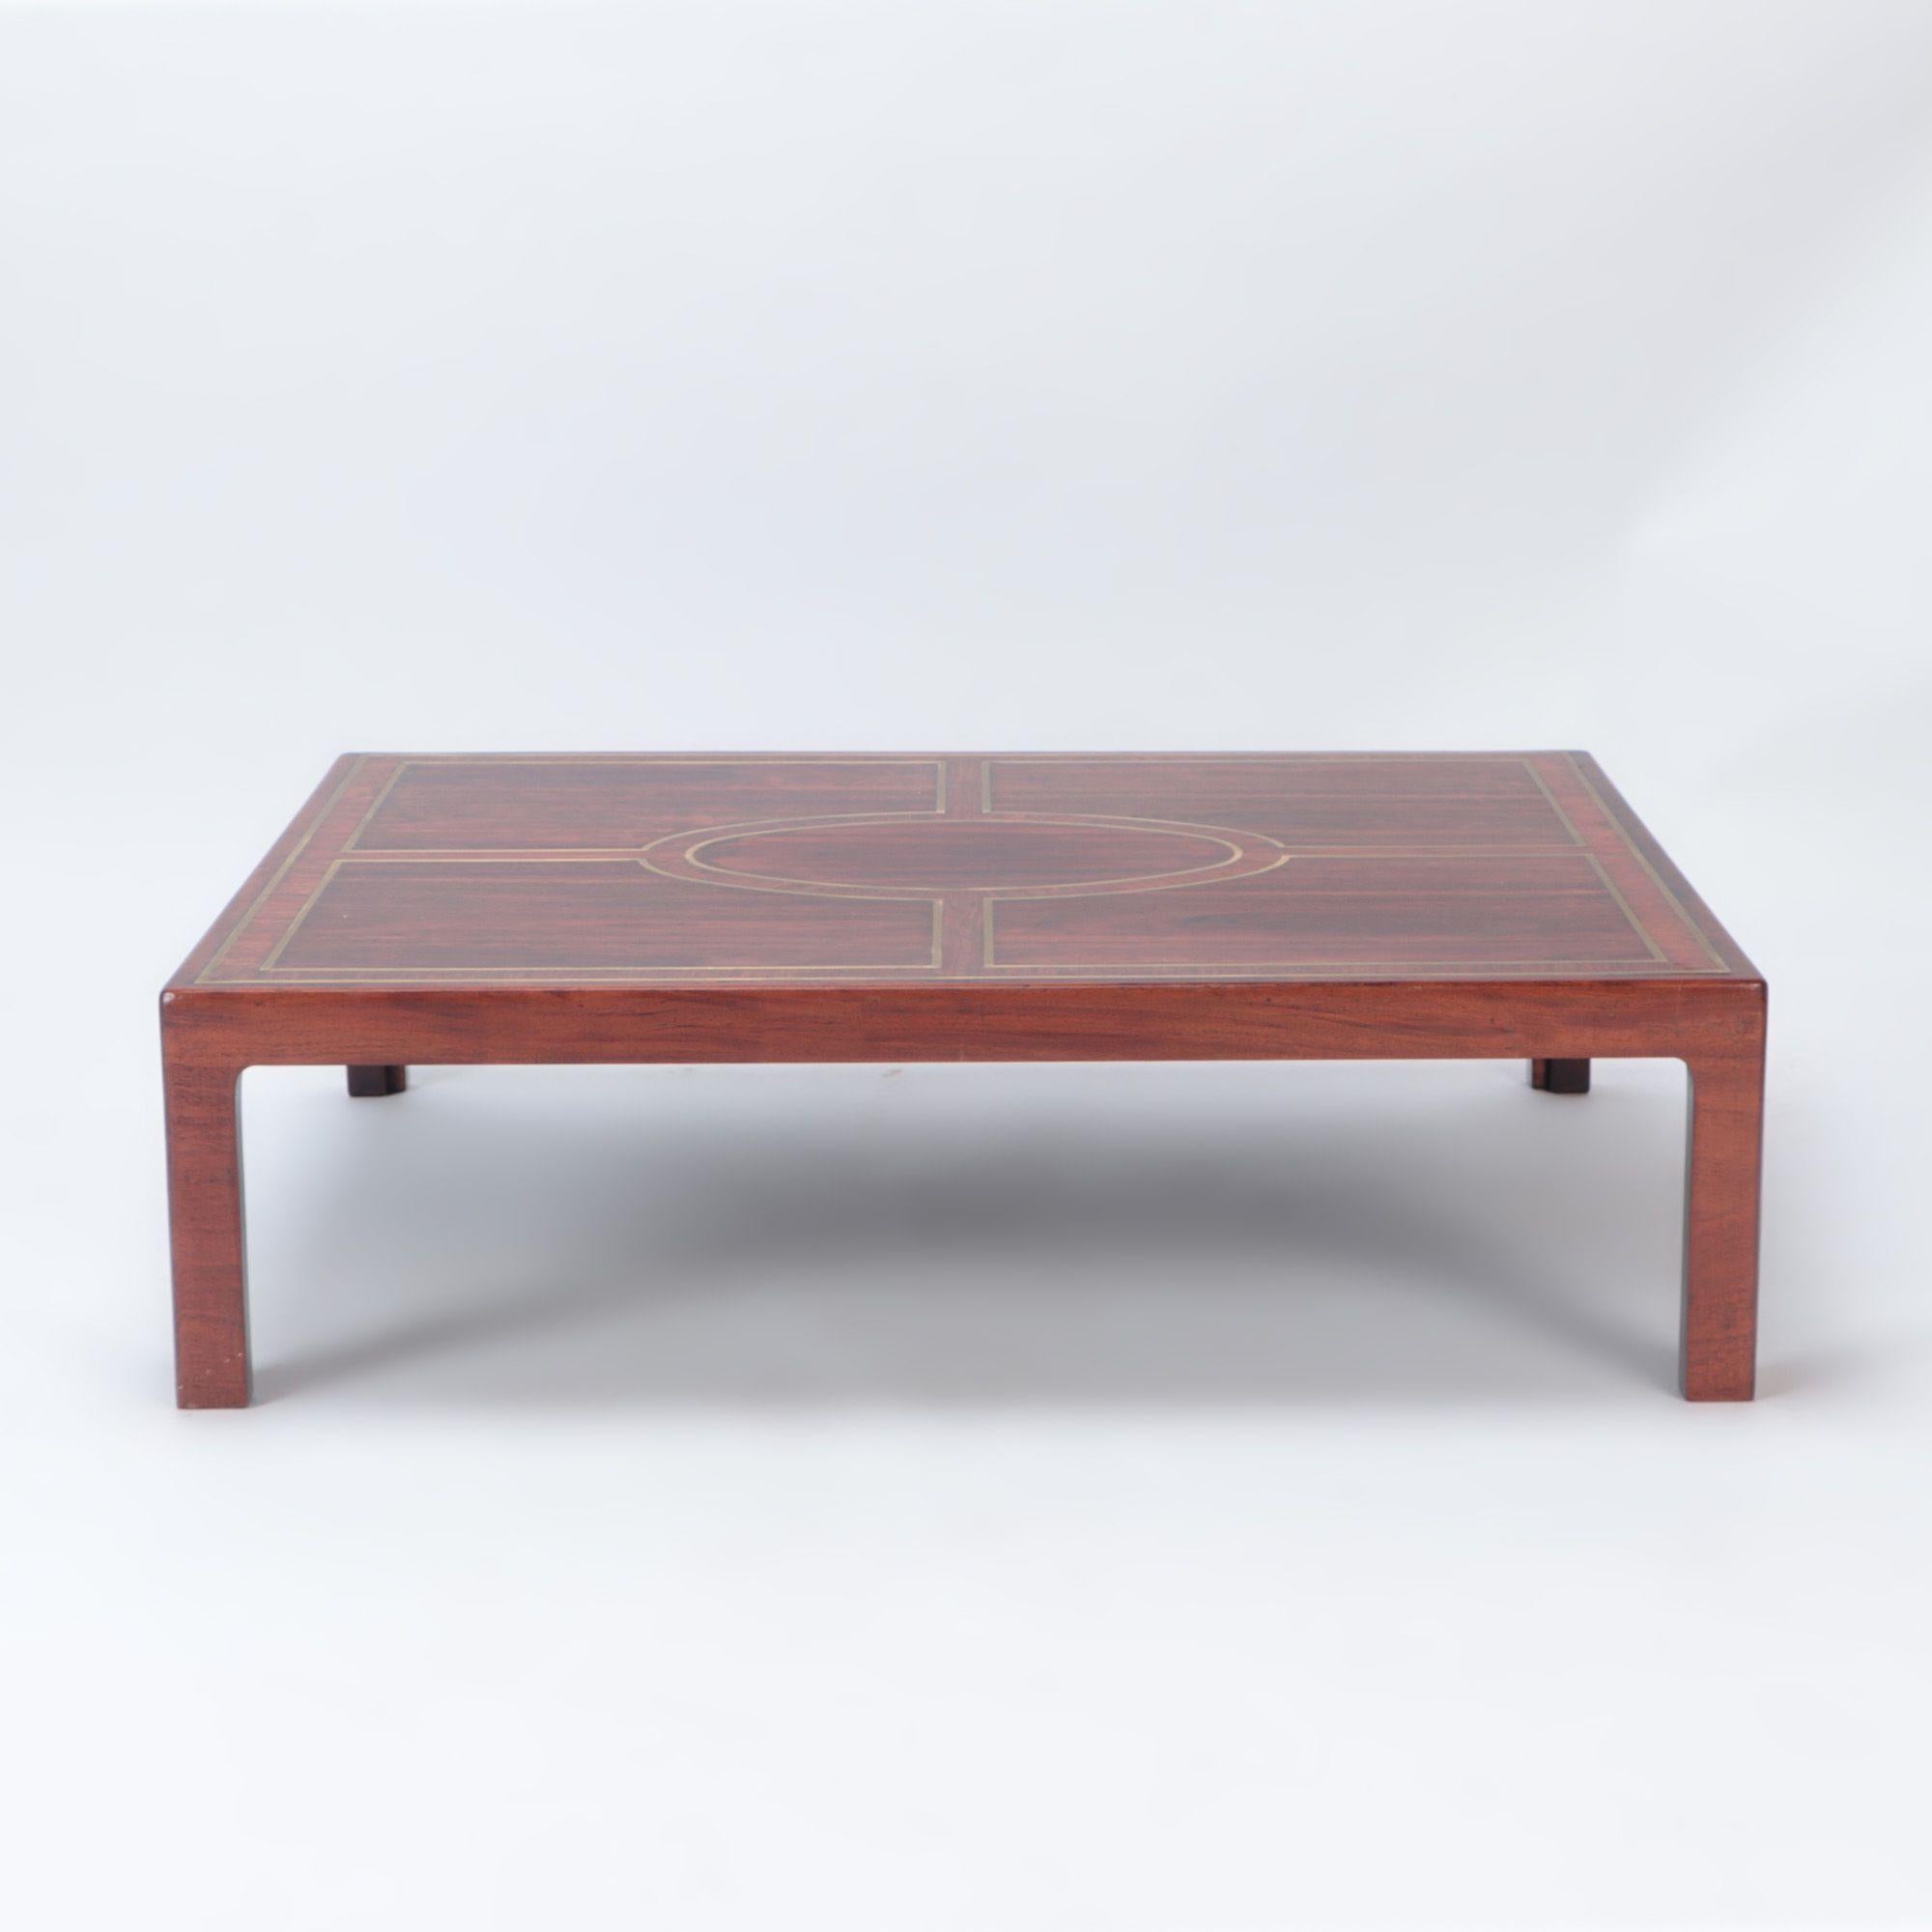 A large rosewood and brass inlaid Brazilian coffee table. C 1975.